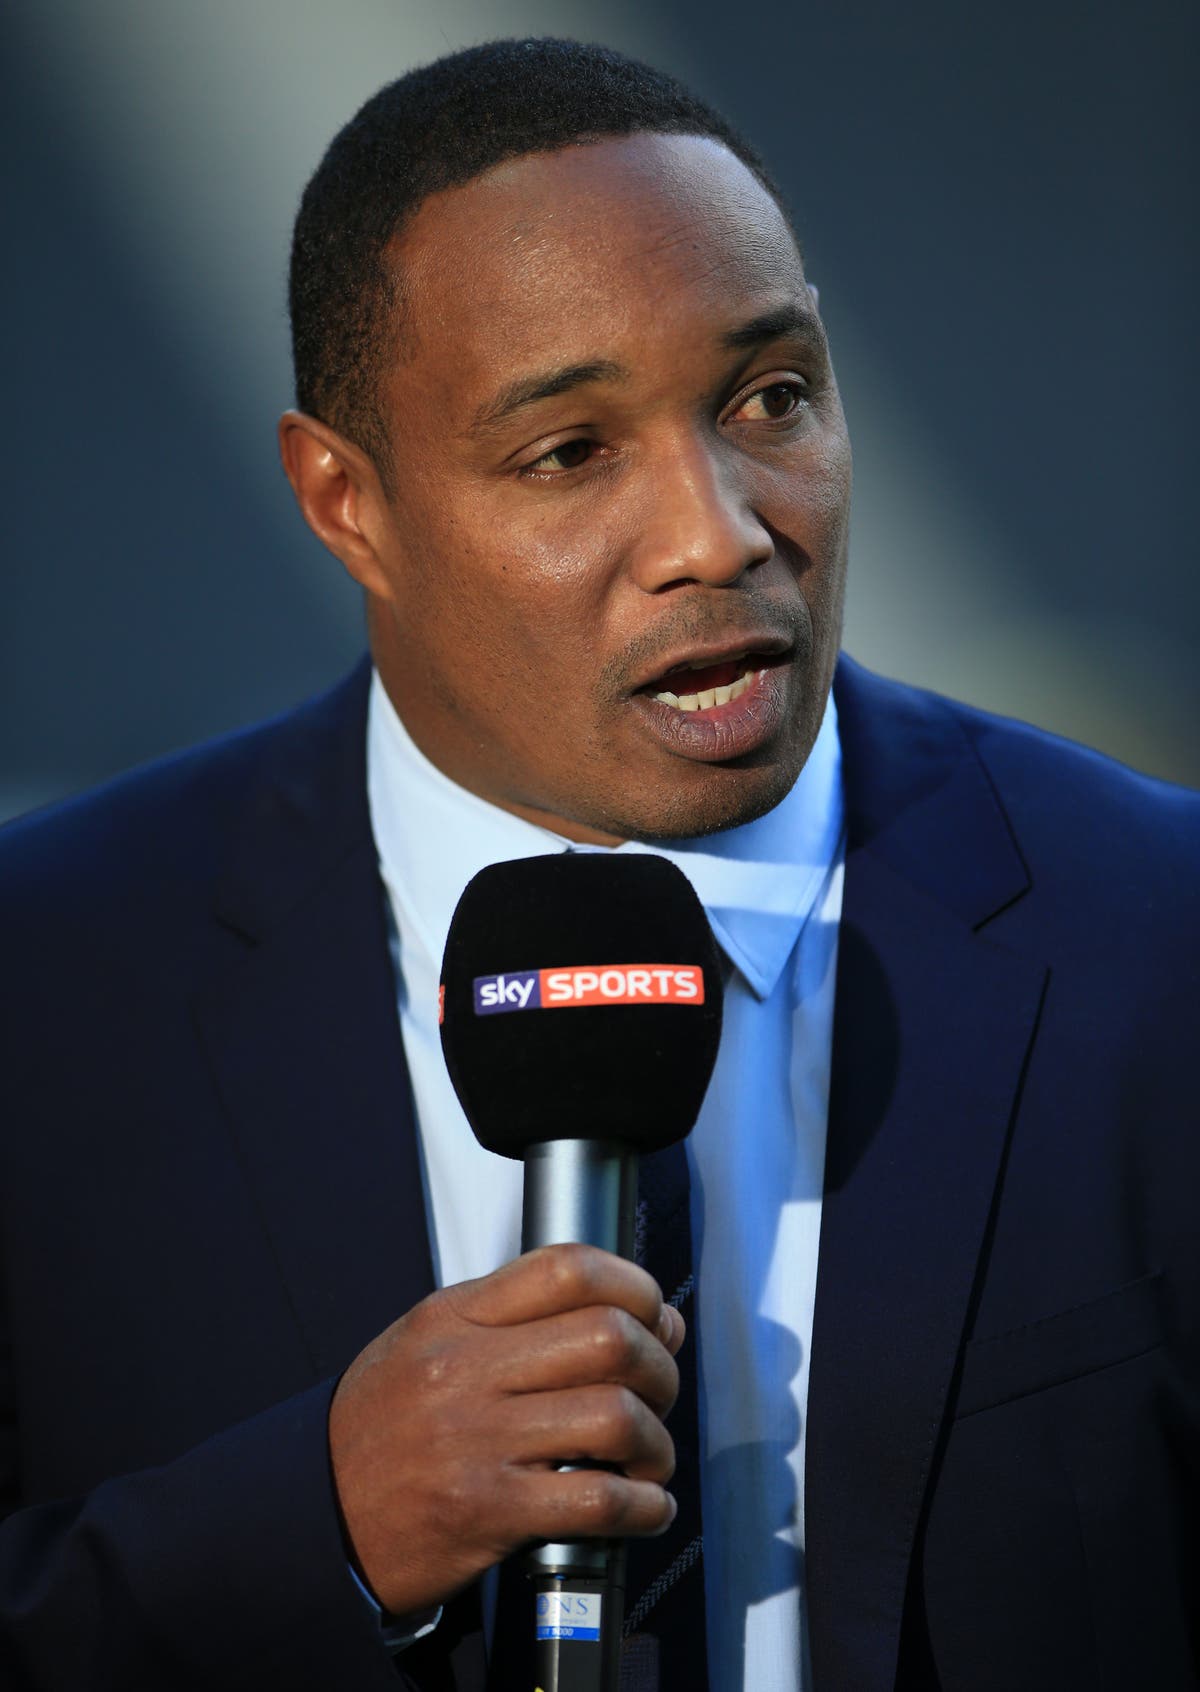 Paul Ince feels Ralf Rangnick has made no progress with ‘soft’ Manchester United